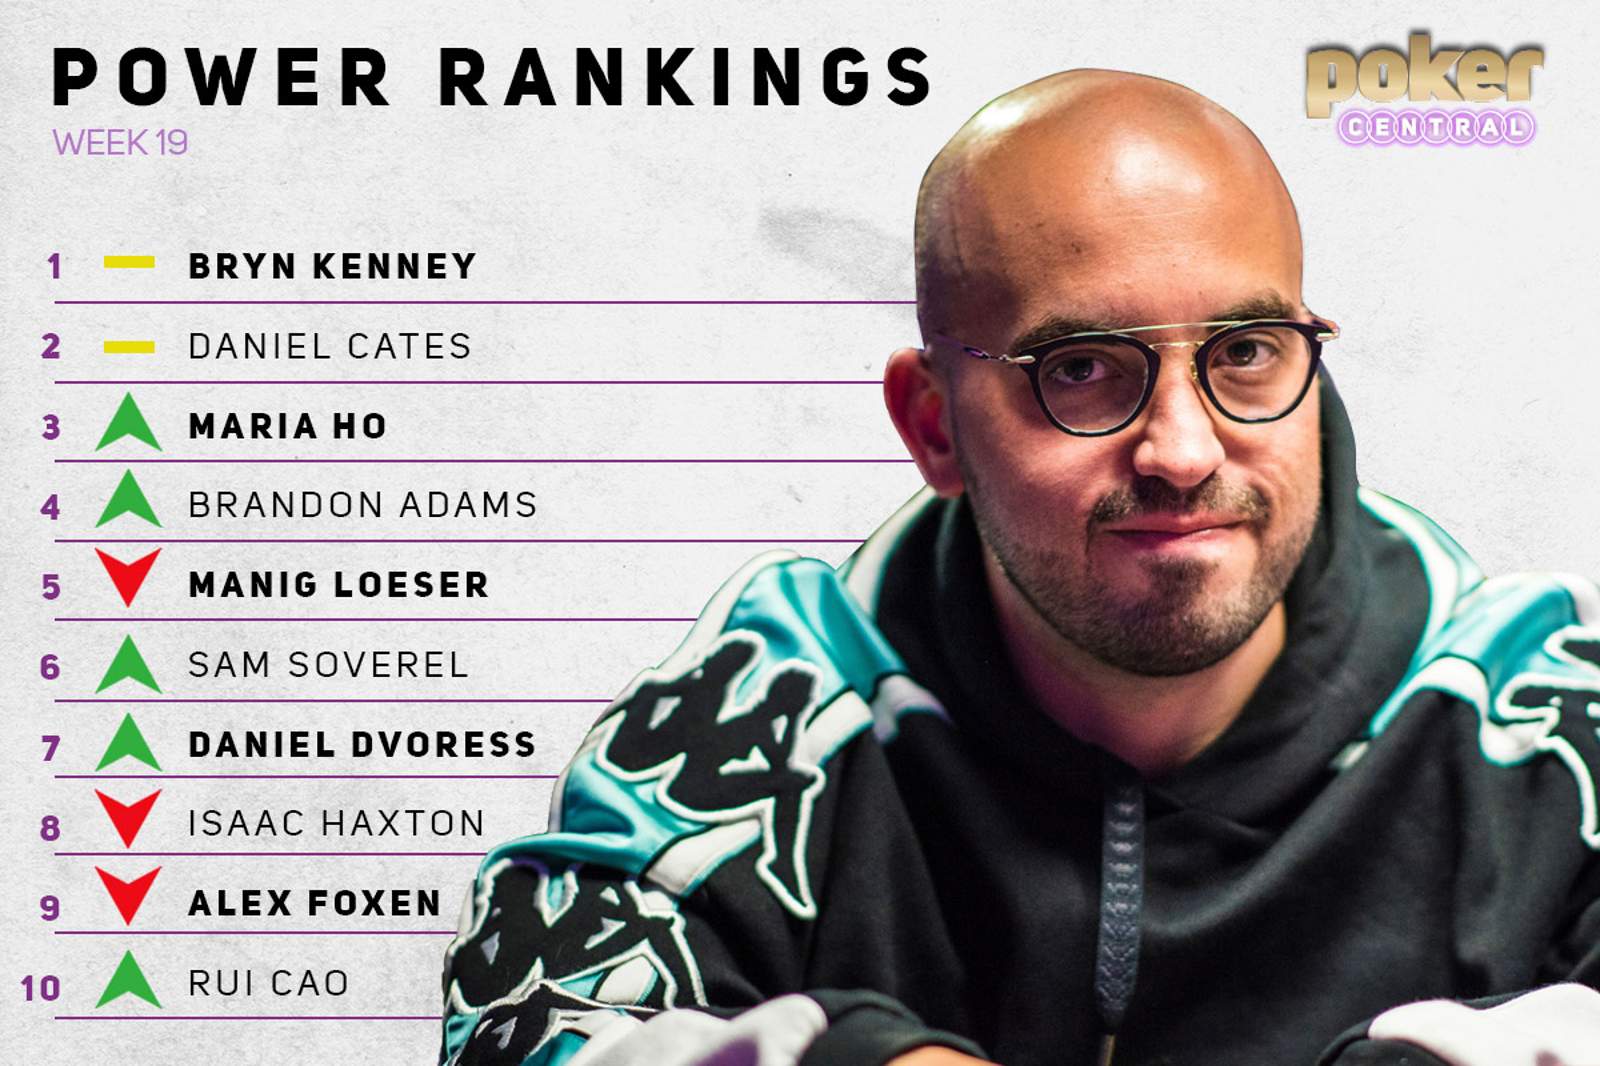 Power Rankings: Kenney & Cates Dominant, Cao & Dvoress Debut